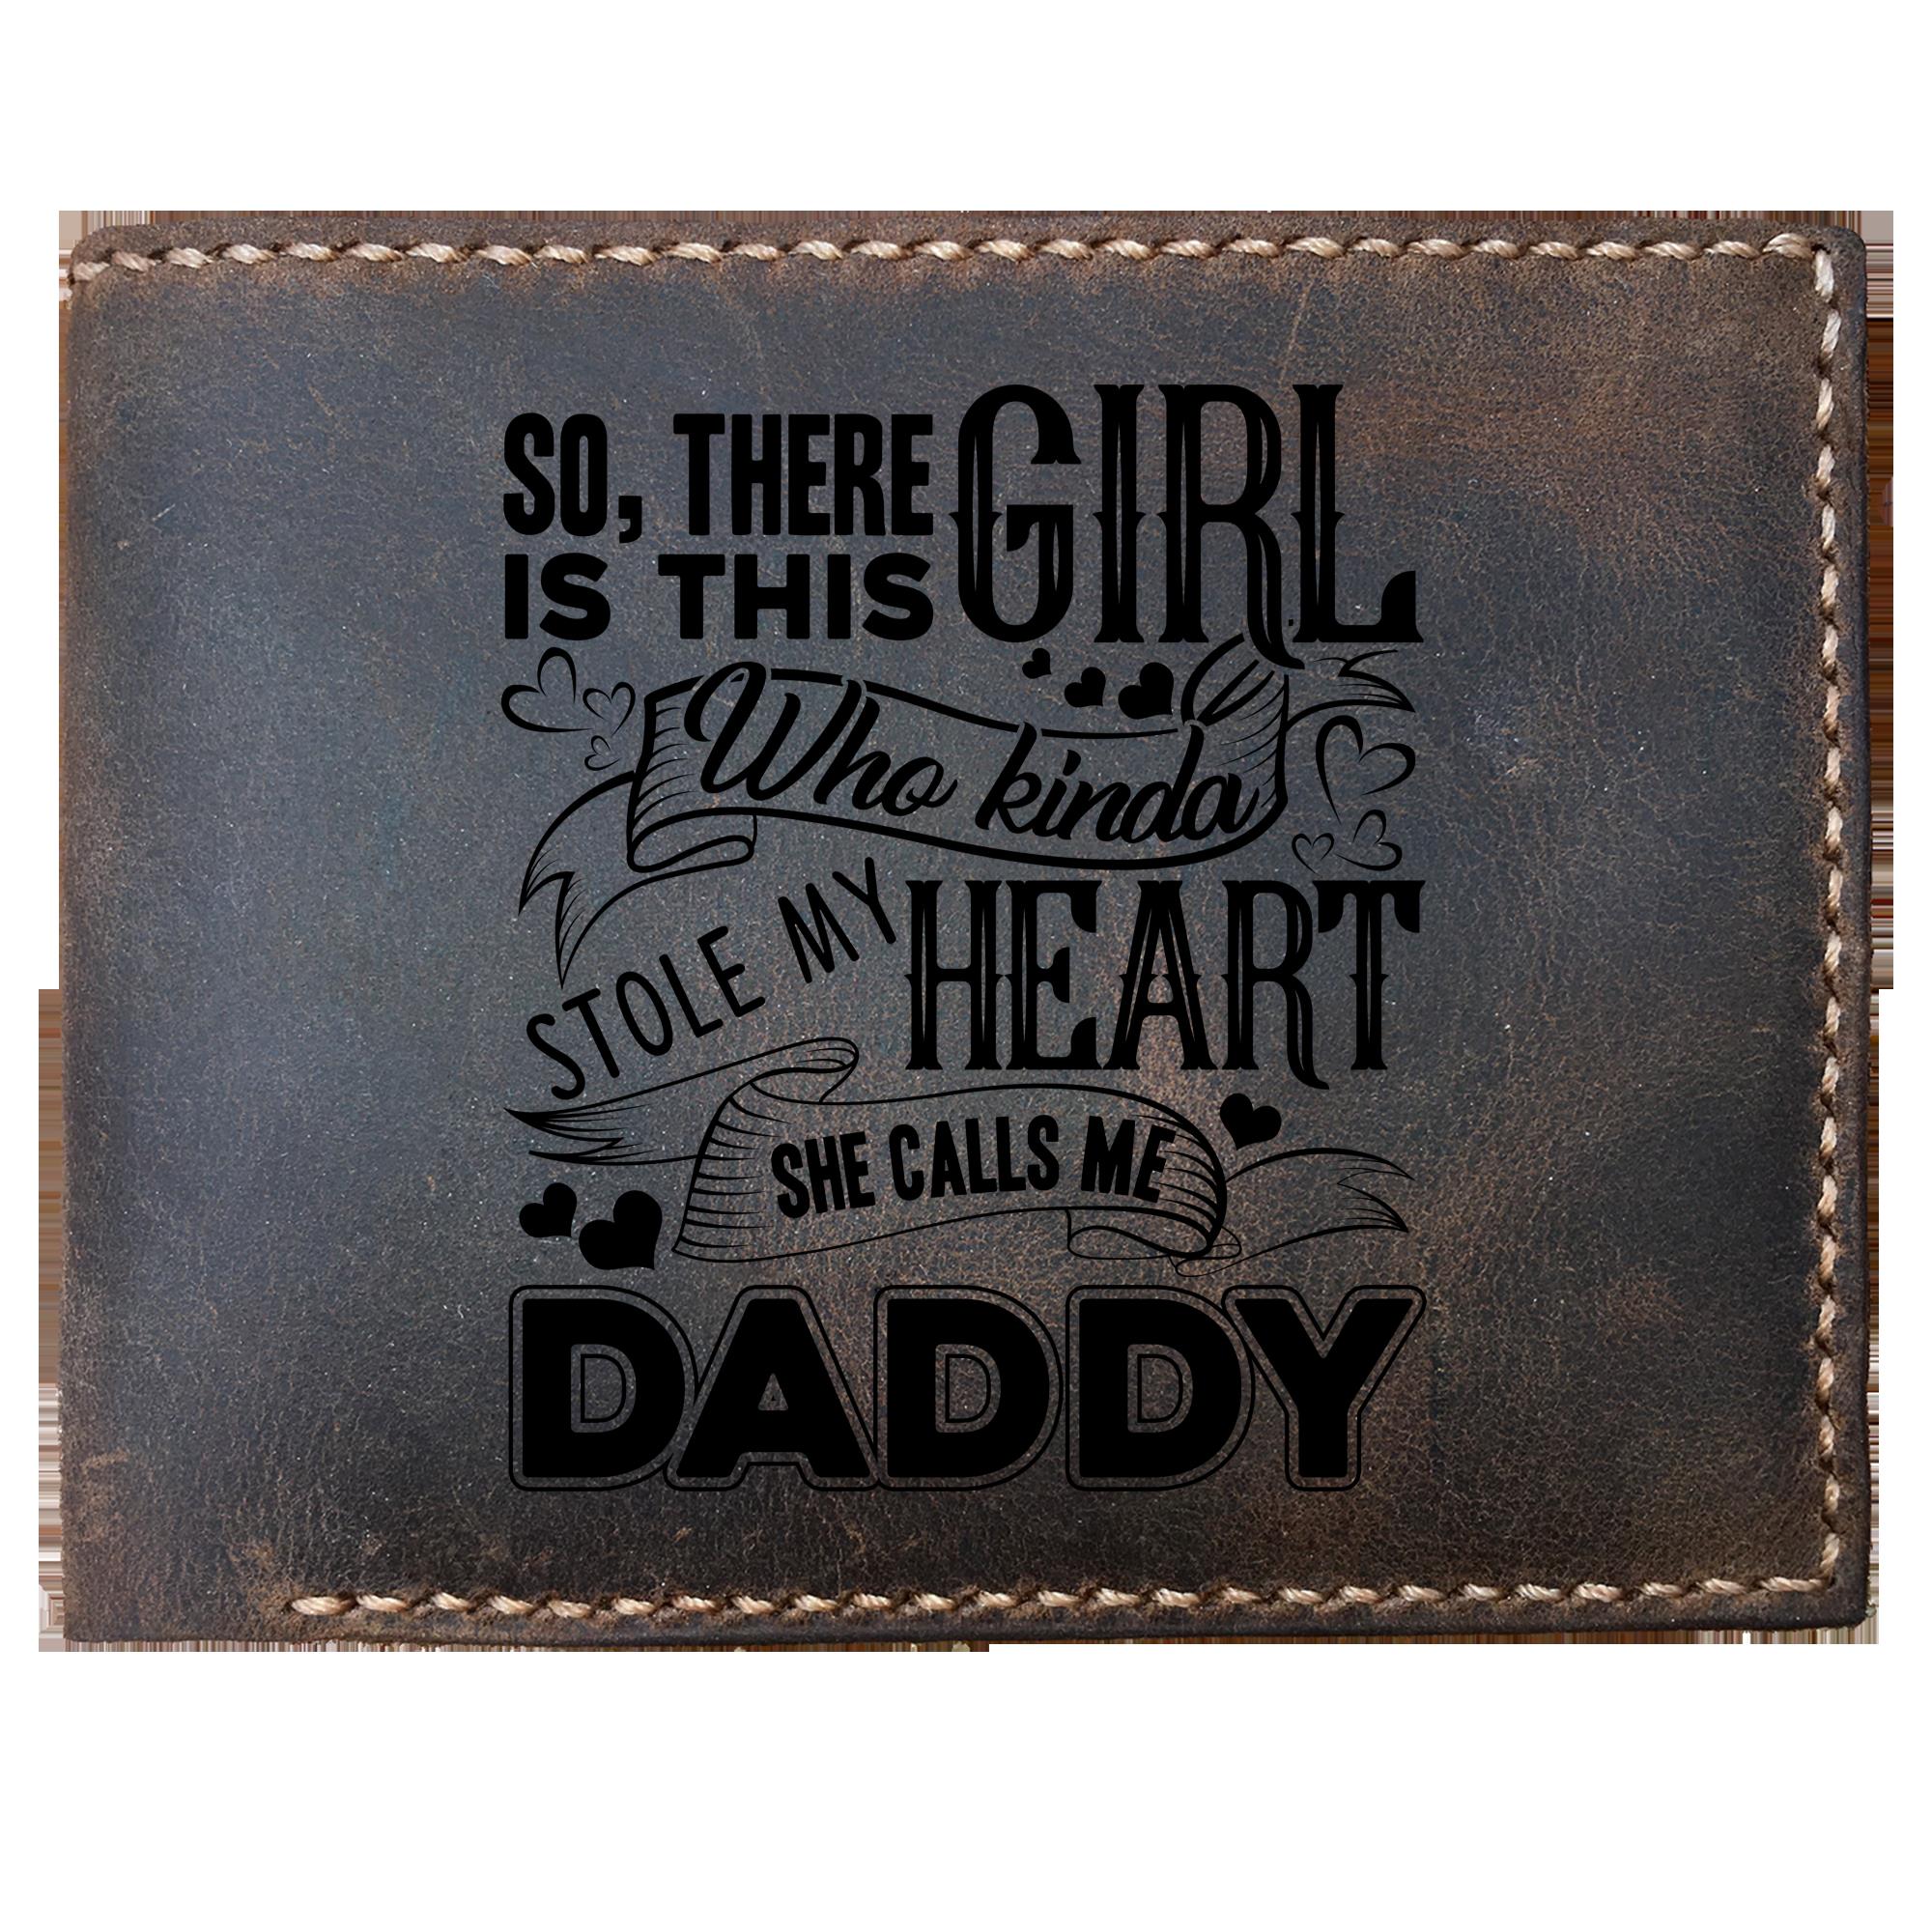 Skitongifts Funny Custom Laser Engraved Bifold Leather Wallet For Men, So, There Is This Girl Who Kinda Stole My Heart. She Calls Me Daddy